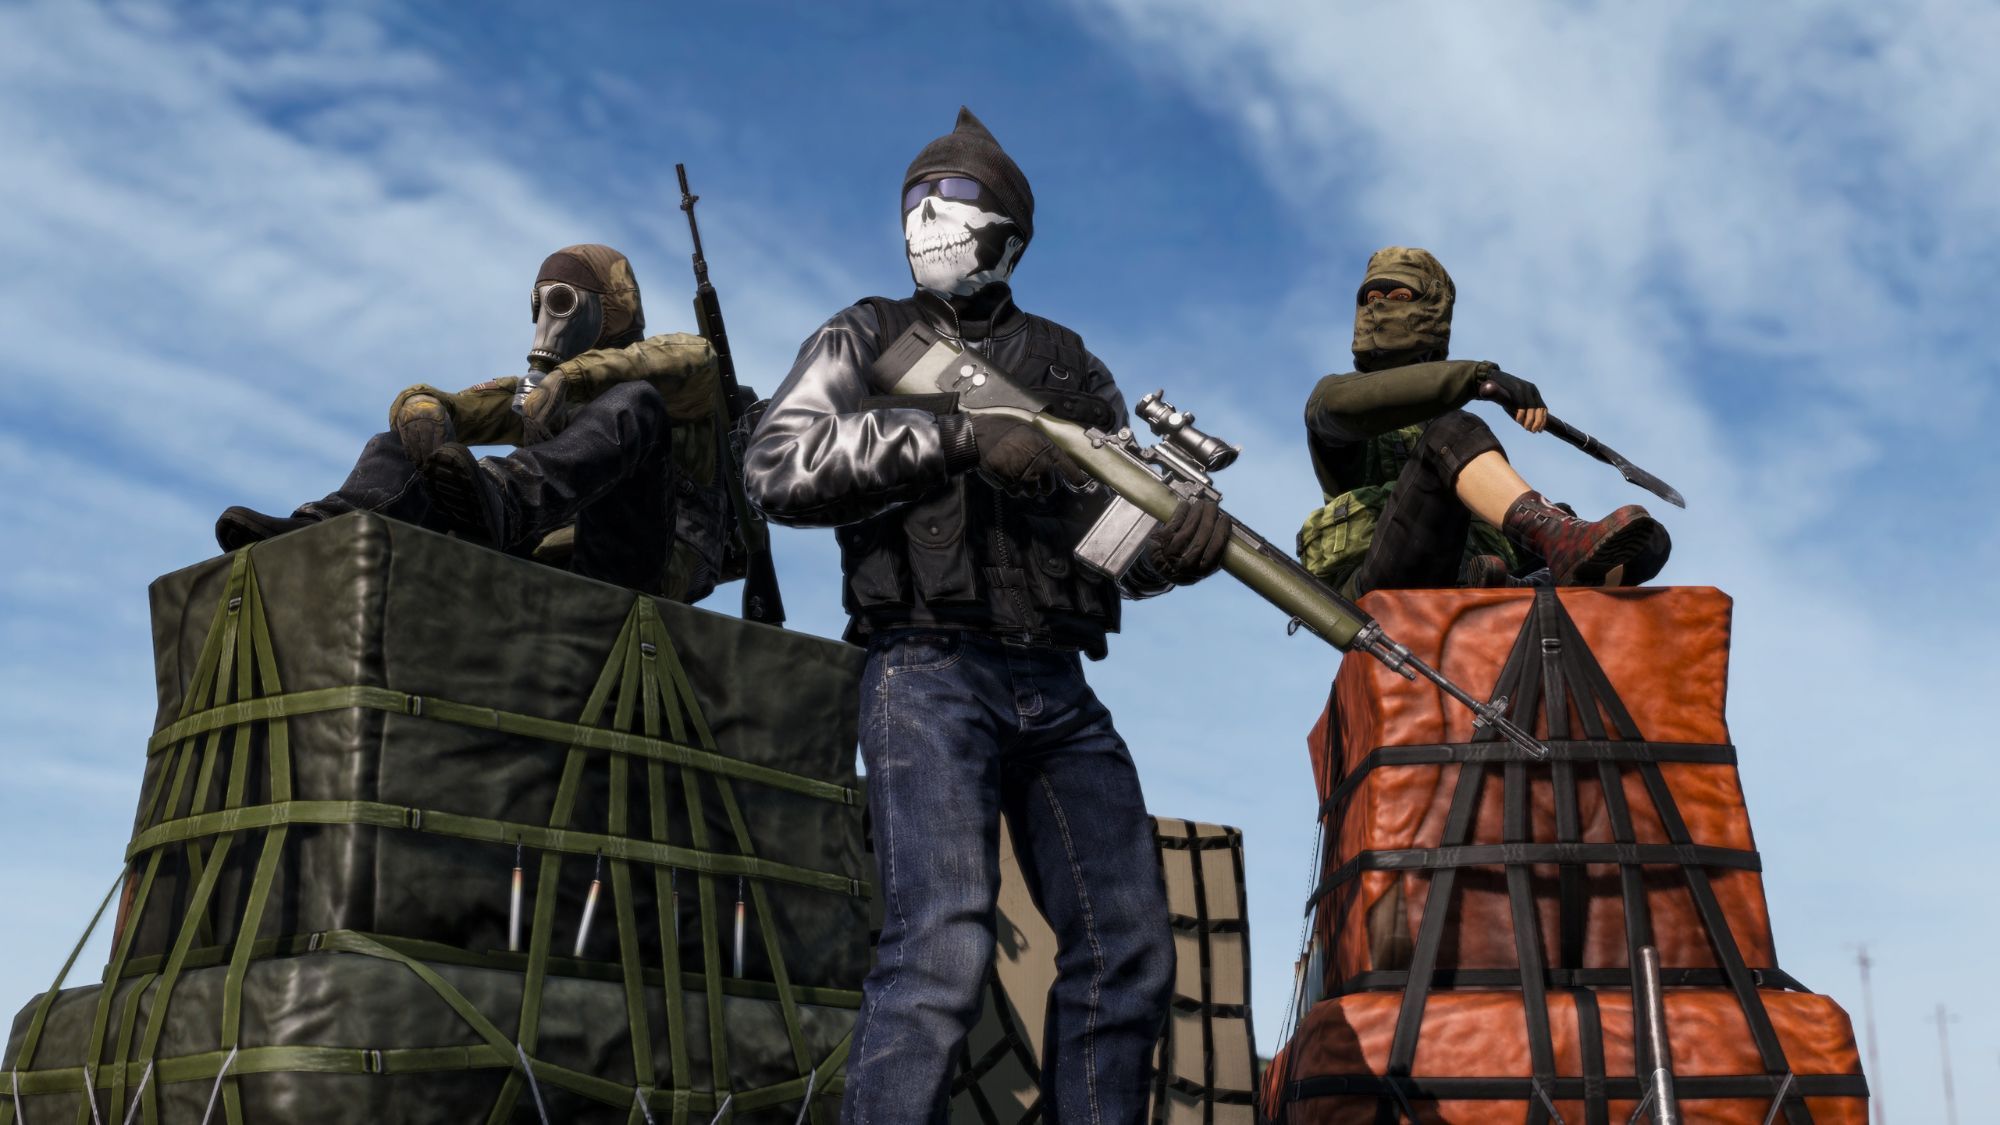 DayZ just added a new rifle, a new air base, and what the heck, a whole new  damn sky